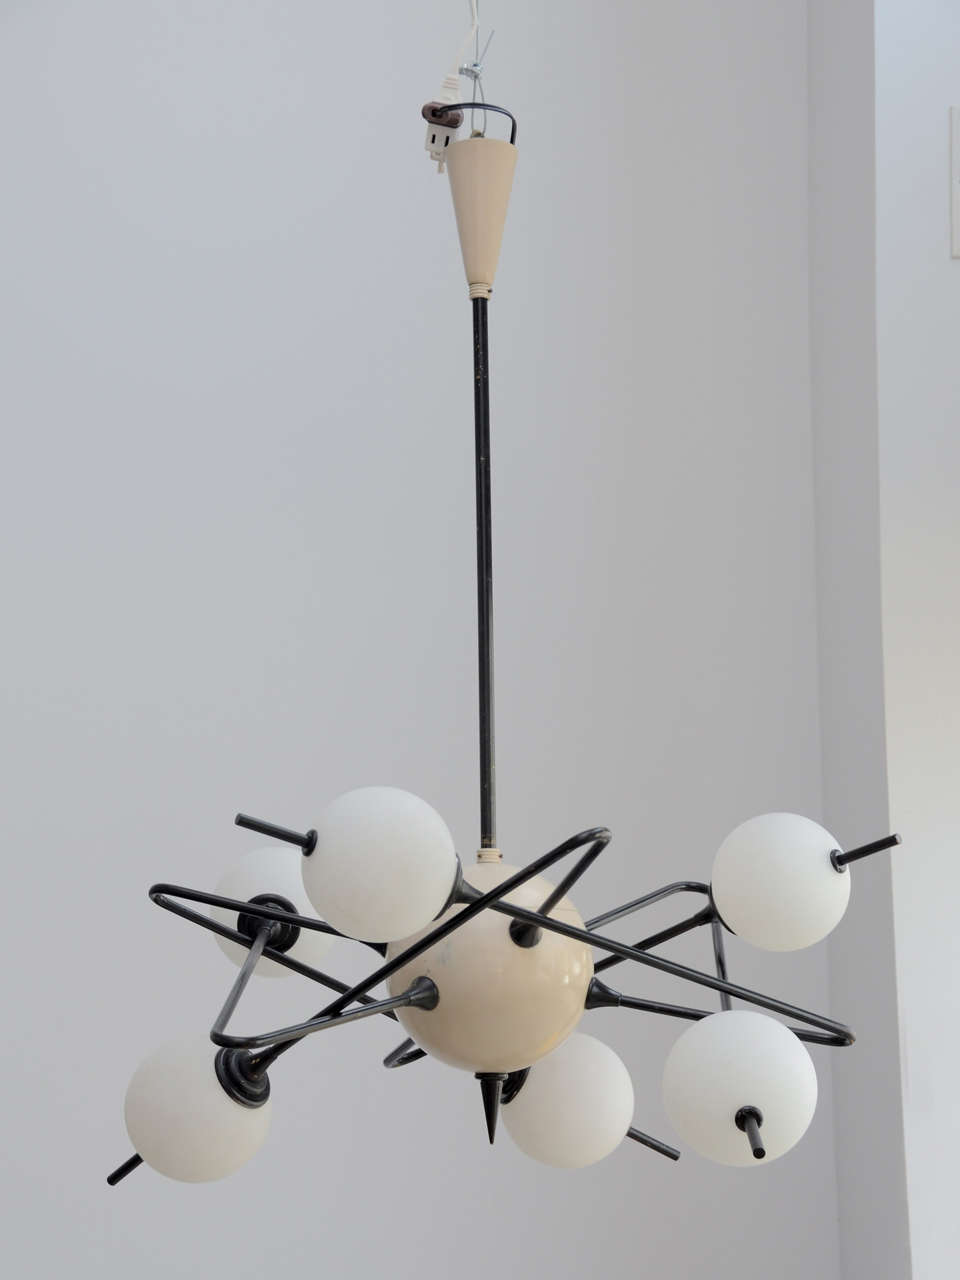 Italian Chandelier by Stilnovo. Six Metal Bent Arms Connected to a Lacquered  Metal Sphere and ending with  Hand Blown  Off-White Glass Globes